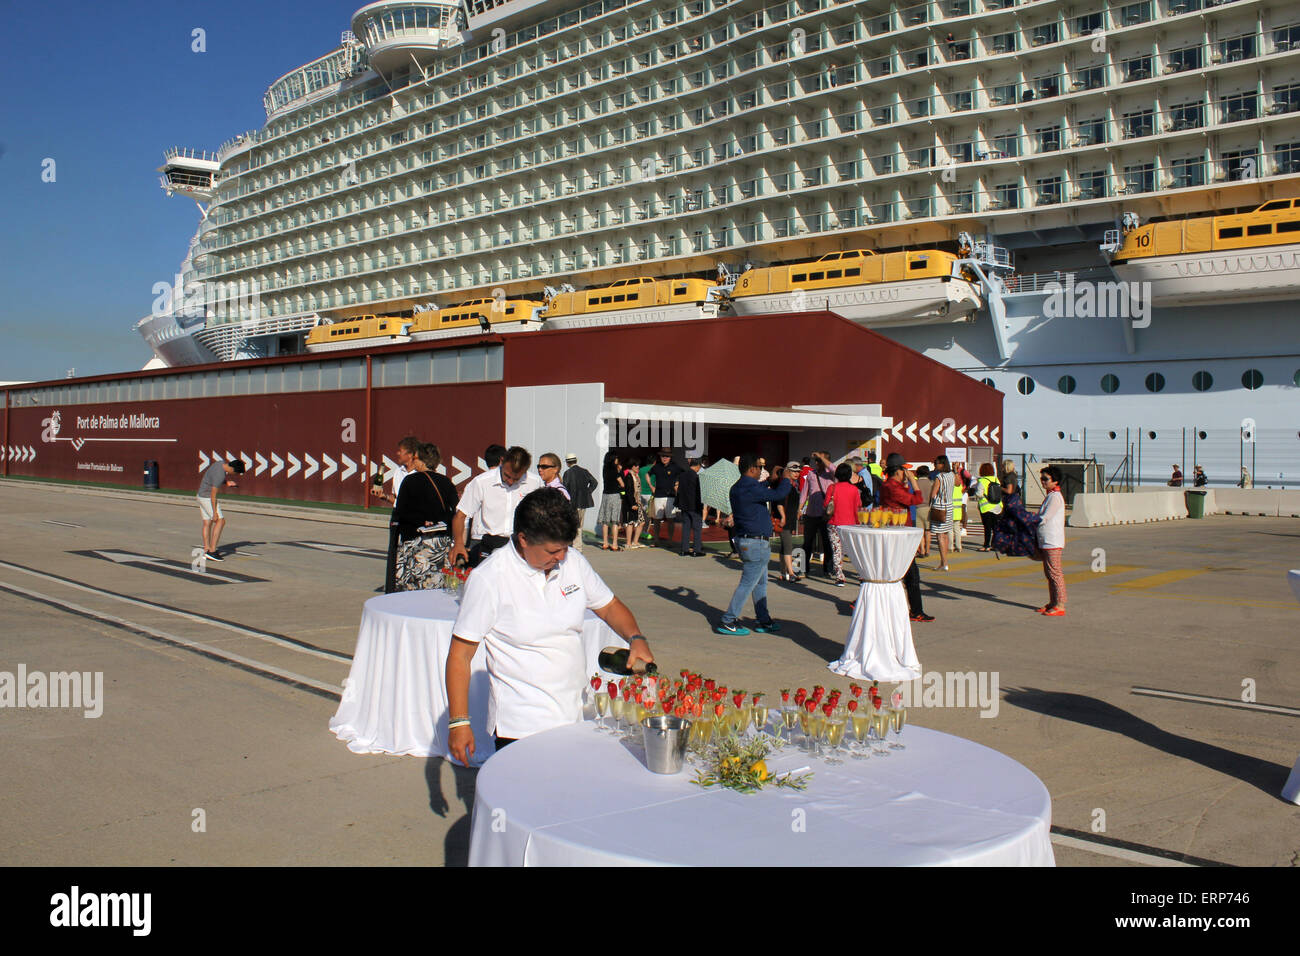 Welcome to Mallorca - strawberries + champagne - Mega Cruise ship “ALLURE OF THE SEAS” (360 mtrs long, launched 2010, Stock Photo